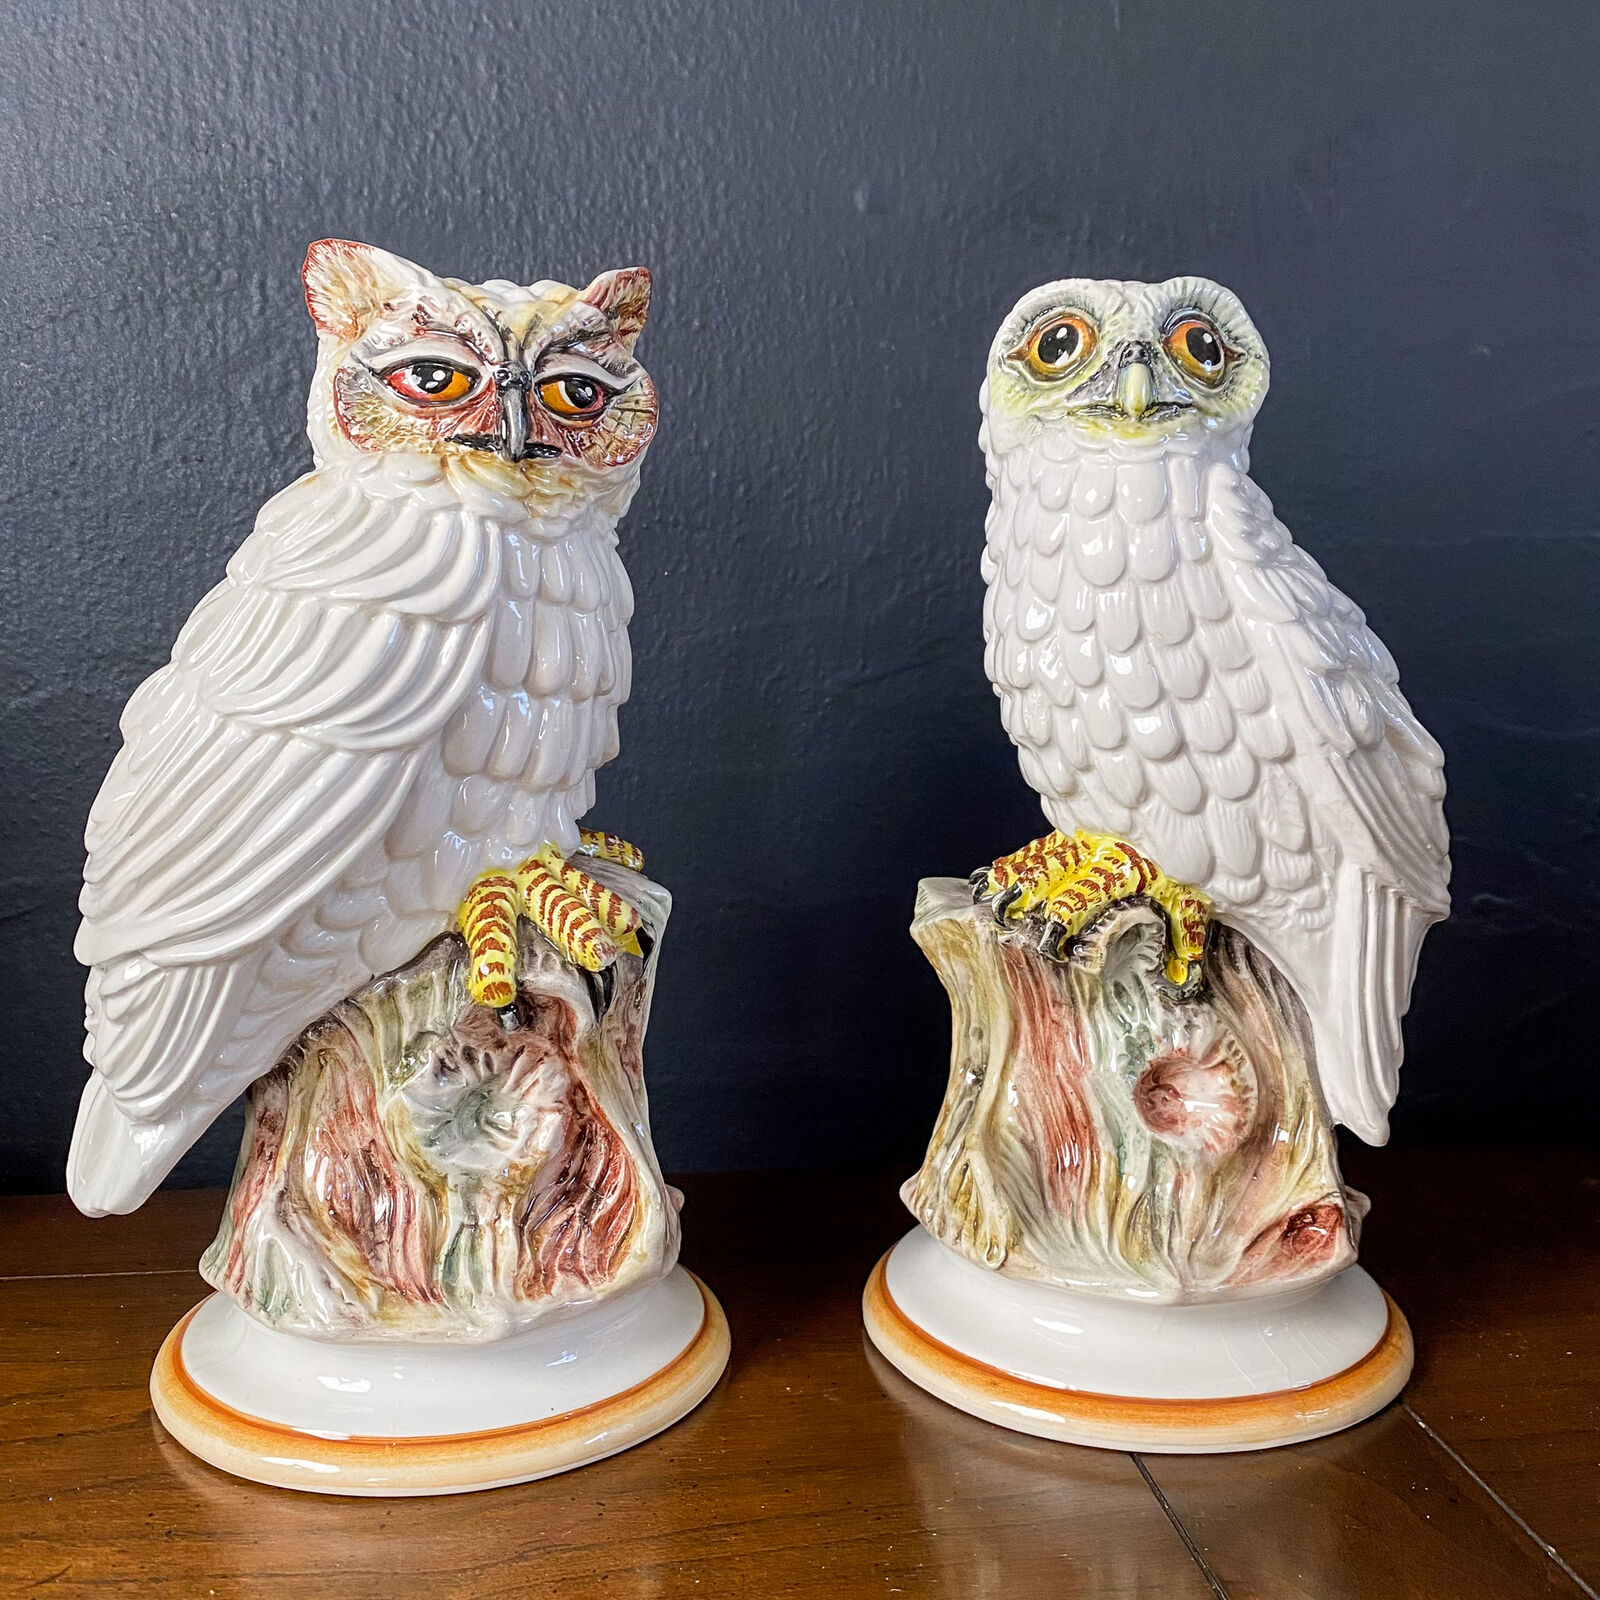 Vintage Hand-Painted PAIR of OWLS Figurine Statue Majolica ITALY Art Pottery 10\